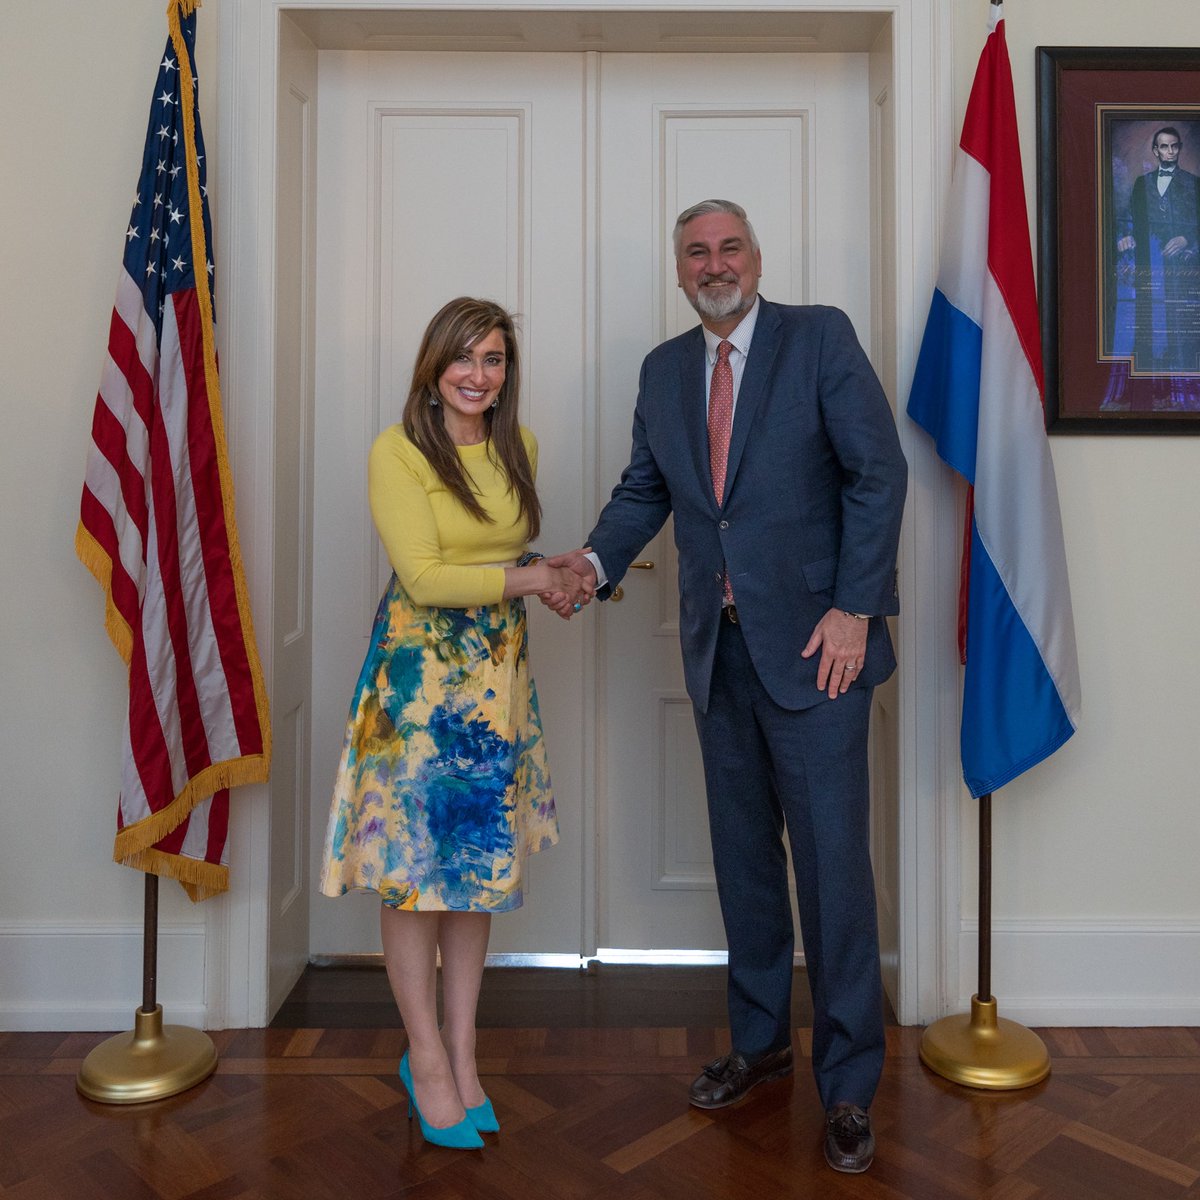 Honored to meet with @USAmbNL Shefali Razdan Duggal to discuss the strong ties between #Indiana and the #Netherlands. Looking forward to future collaborations! 🇺🇸🇳🇱 #INEurope